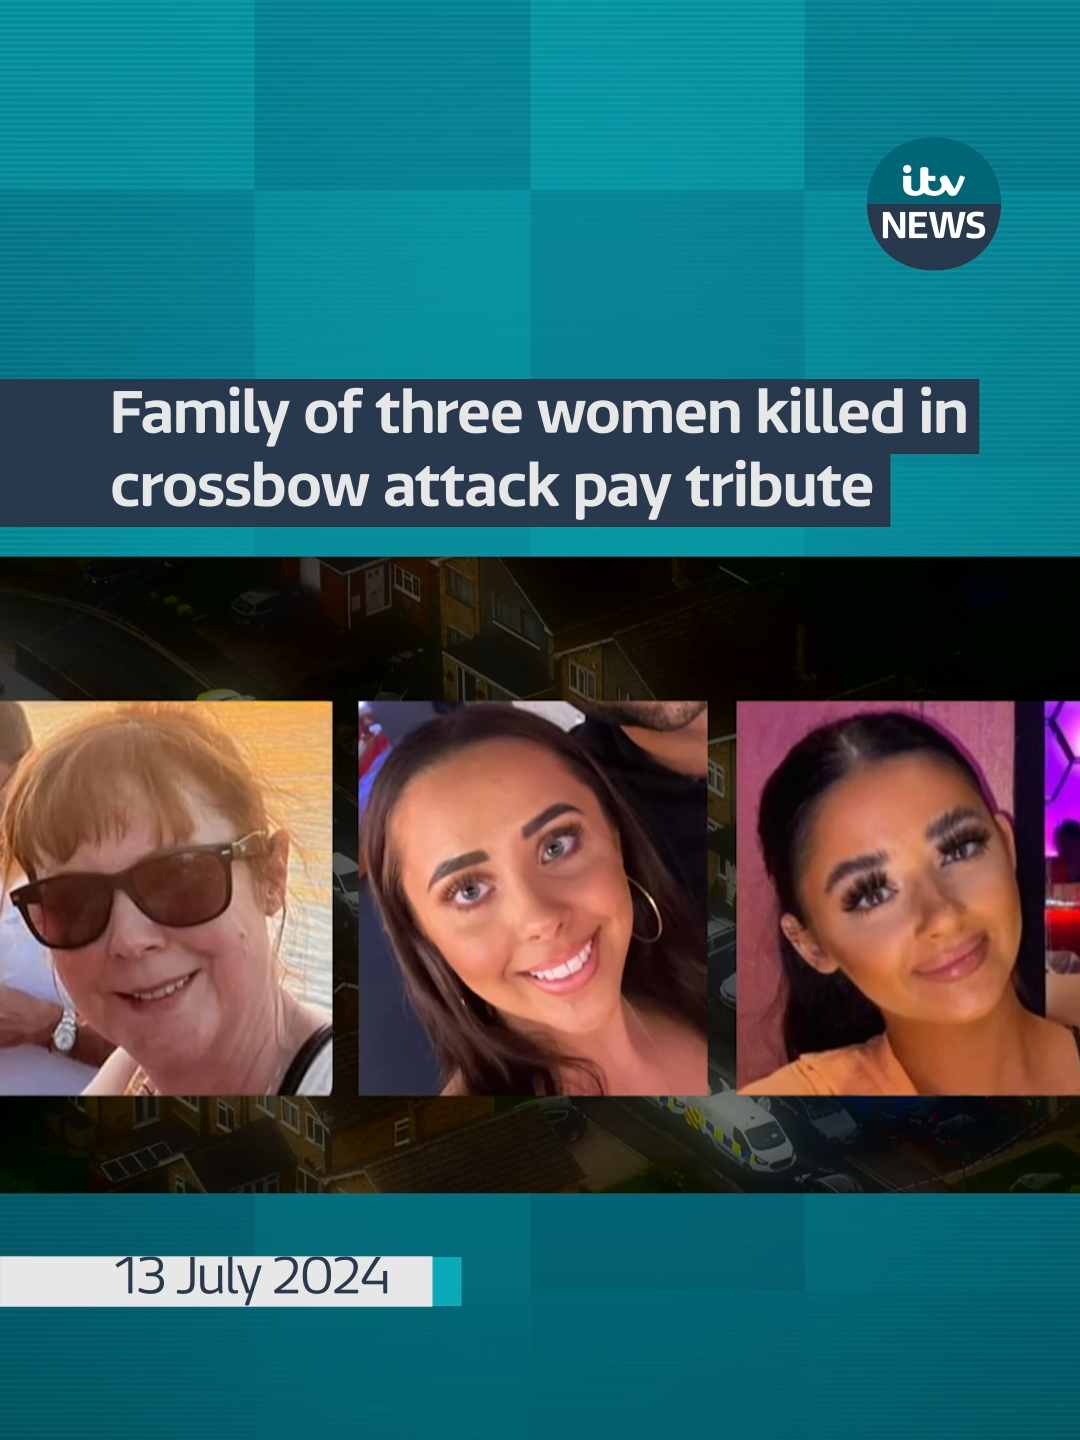 Family of three women killed in crossbow attack pay tribute  #crime #news #itvnews